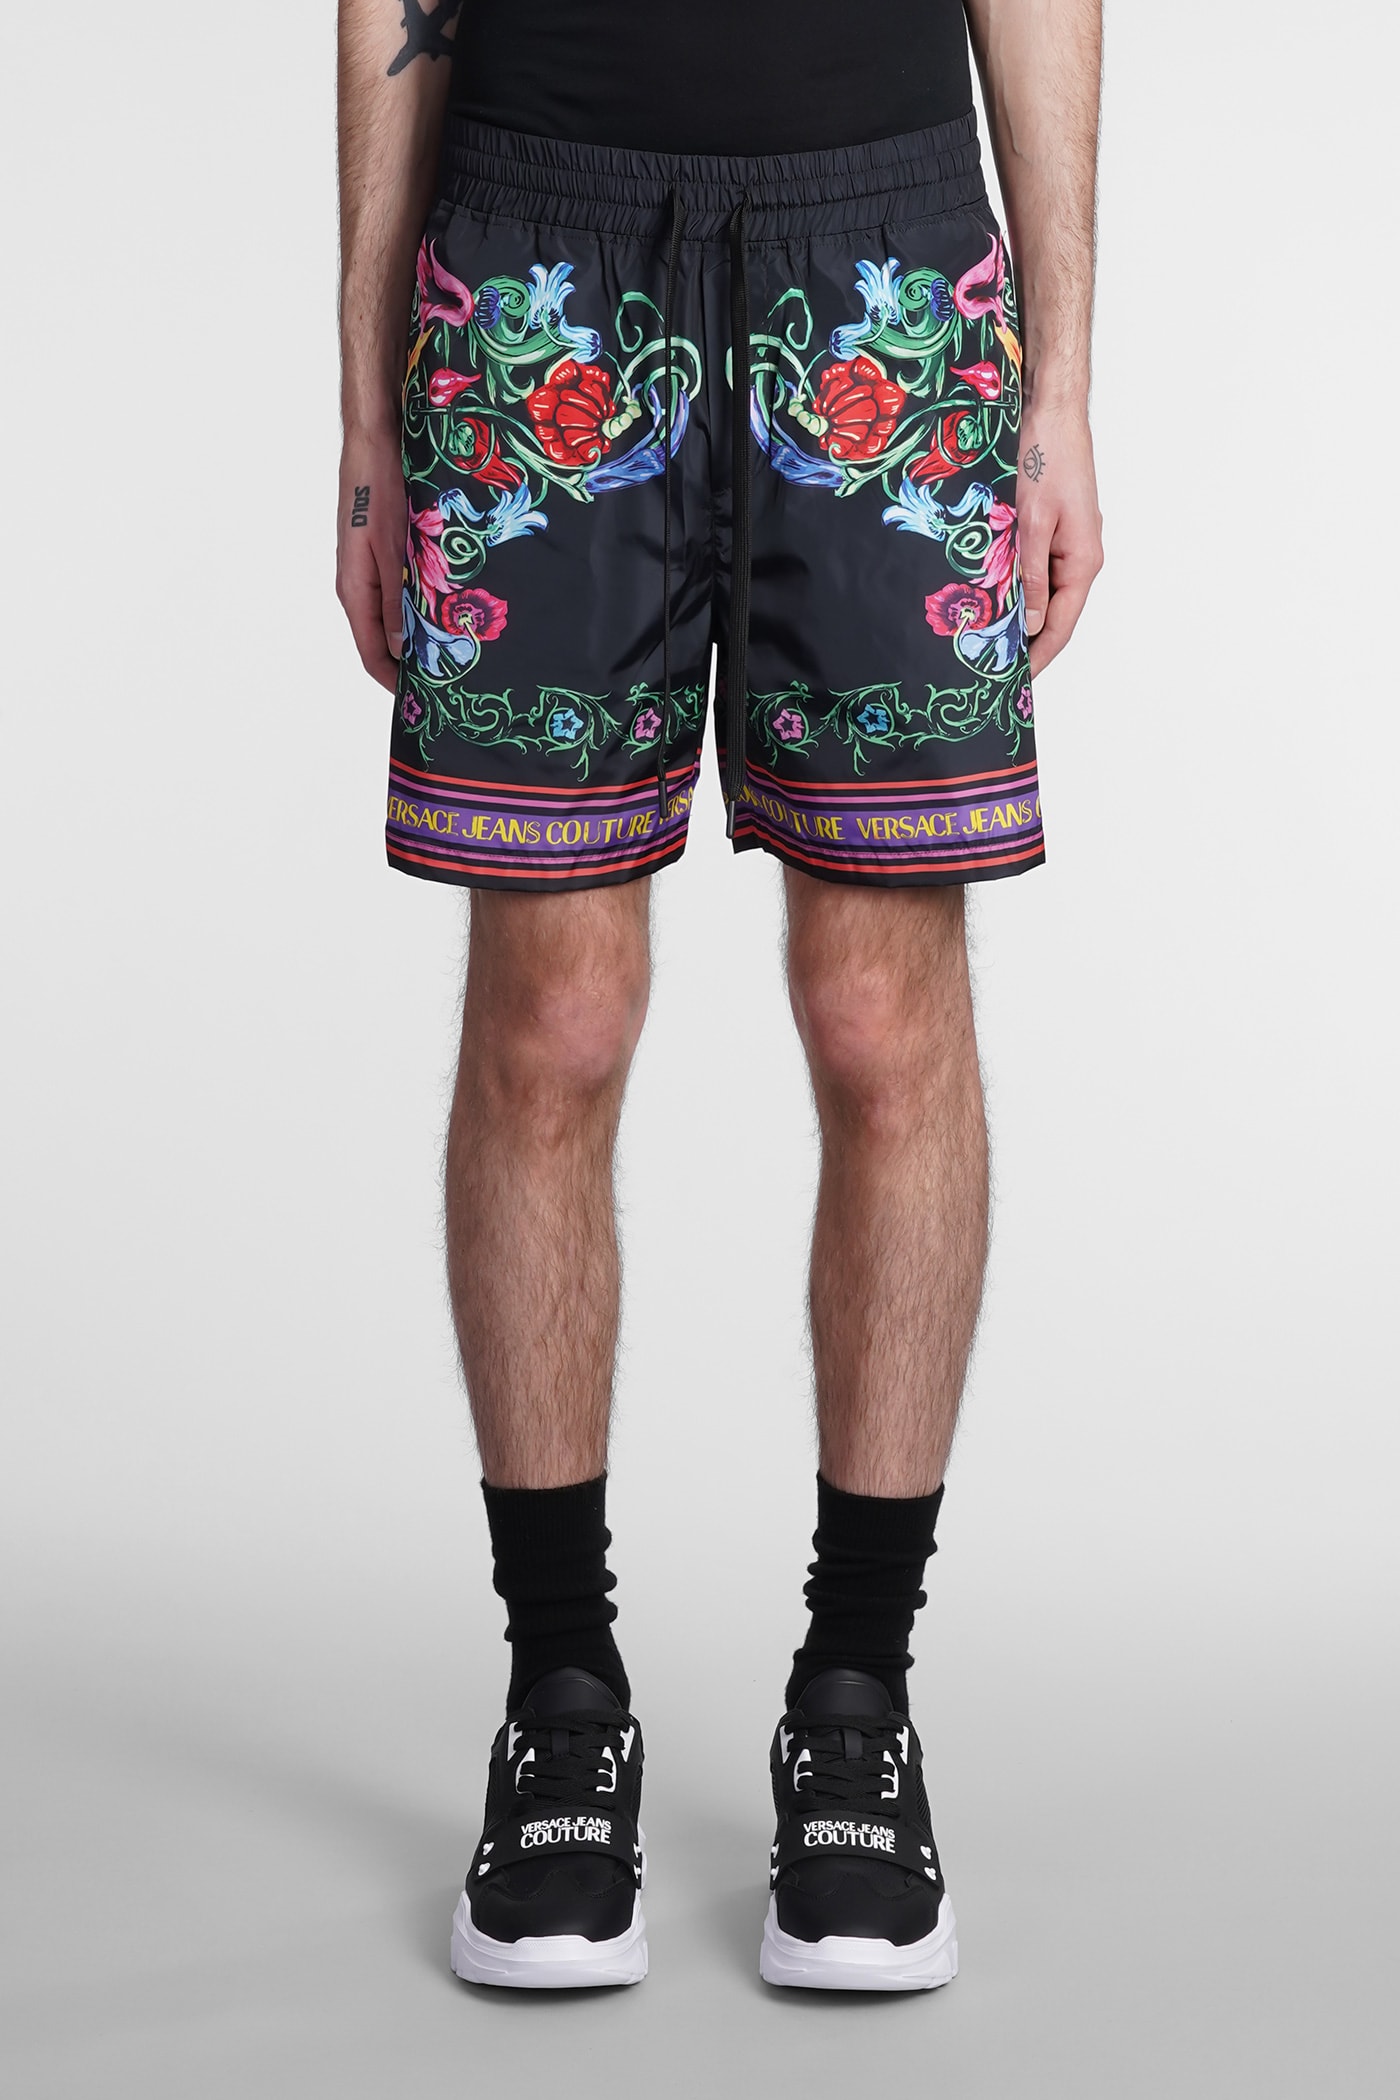 VERSACE JEANS COUTURE SHORTS IN BLACK MULTICOLOR NYLON